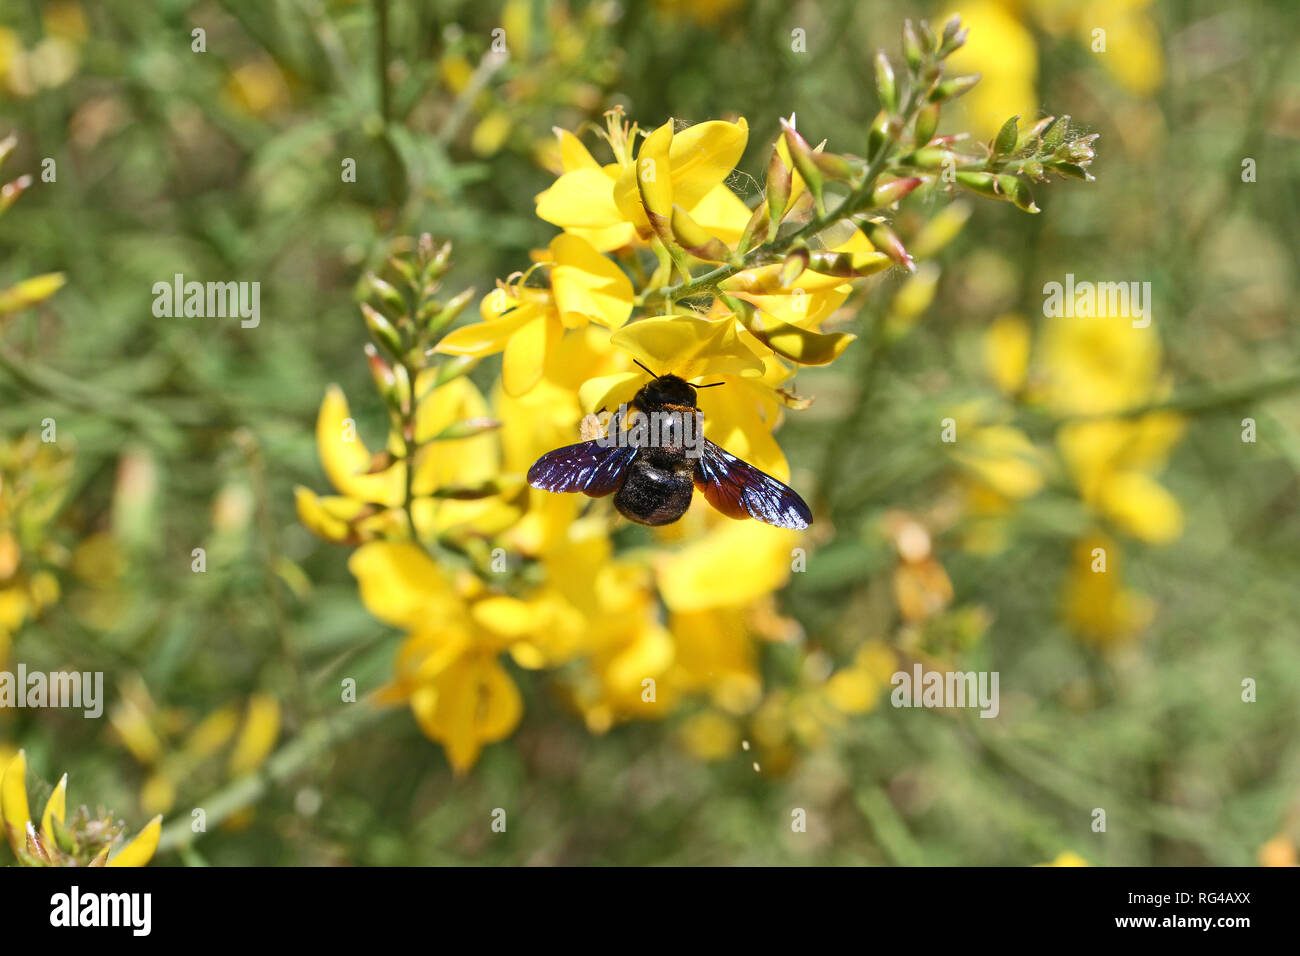 Carpenter bee Latin name xylocopa violacea on yellow broom or ginsestra flower Latin genista cinerea not cytisus scoparius or spachianus in Italy Stock Photo